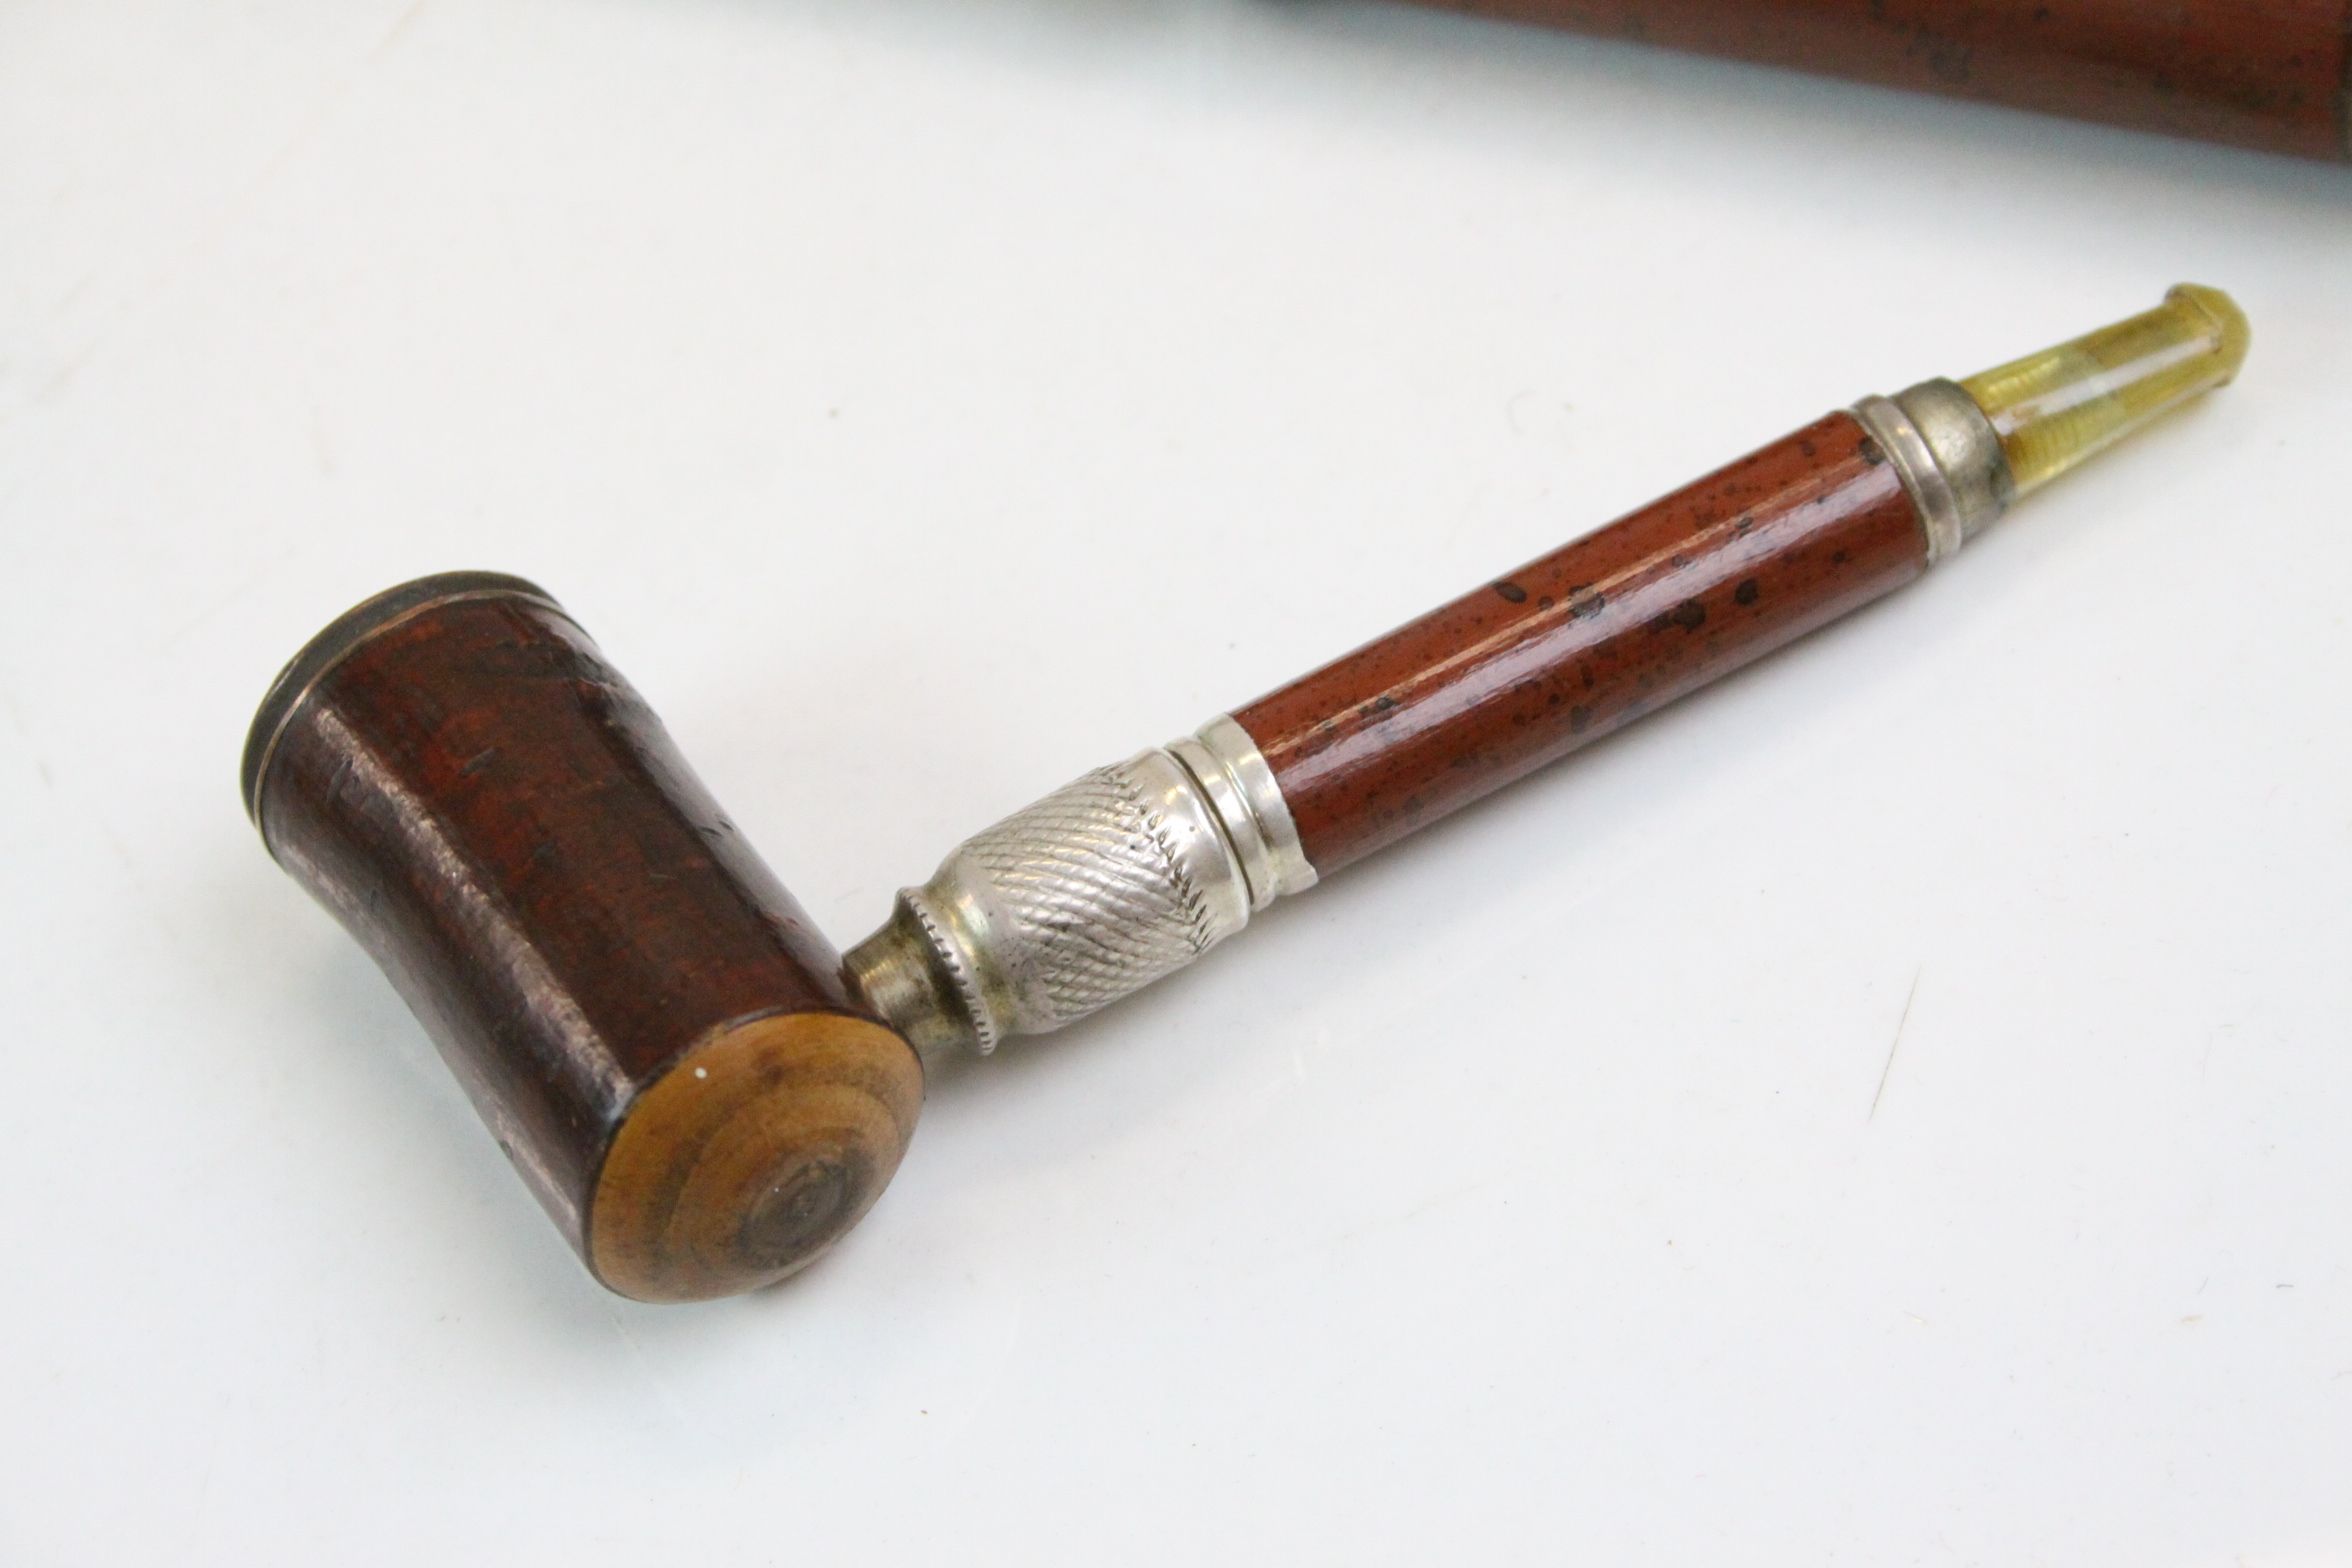 Antique smokers companion lacquer walking stick - Image 2 of 5